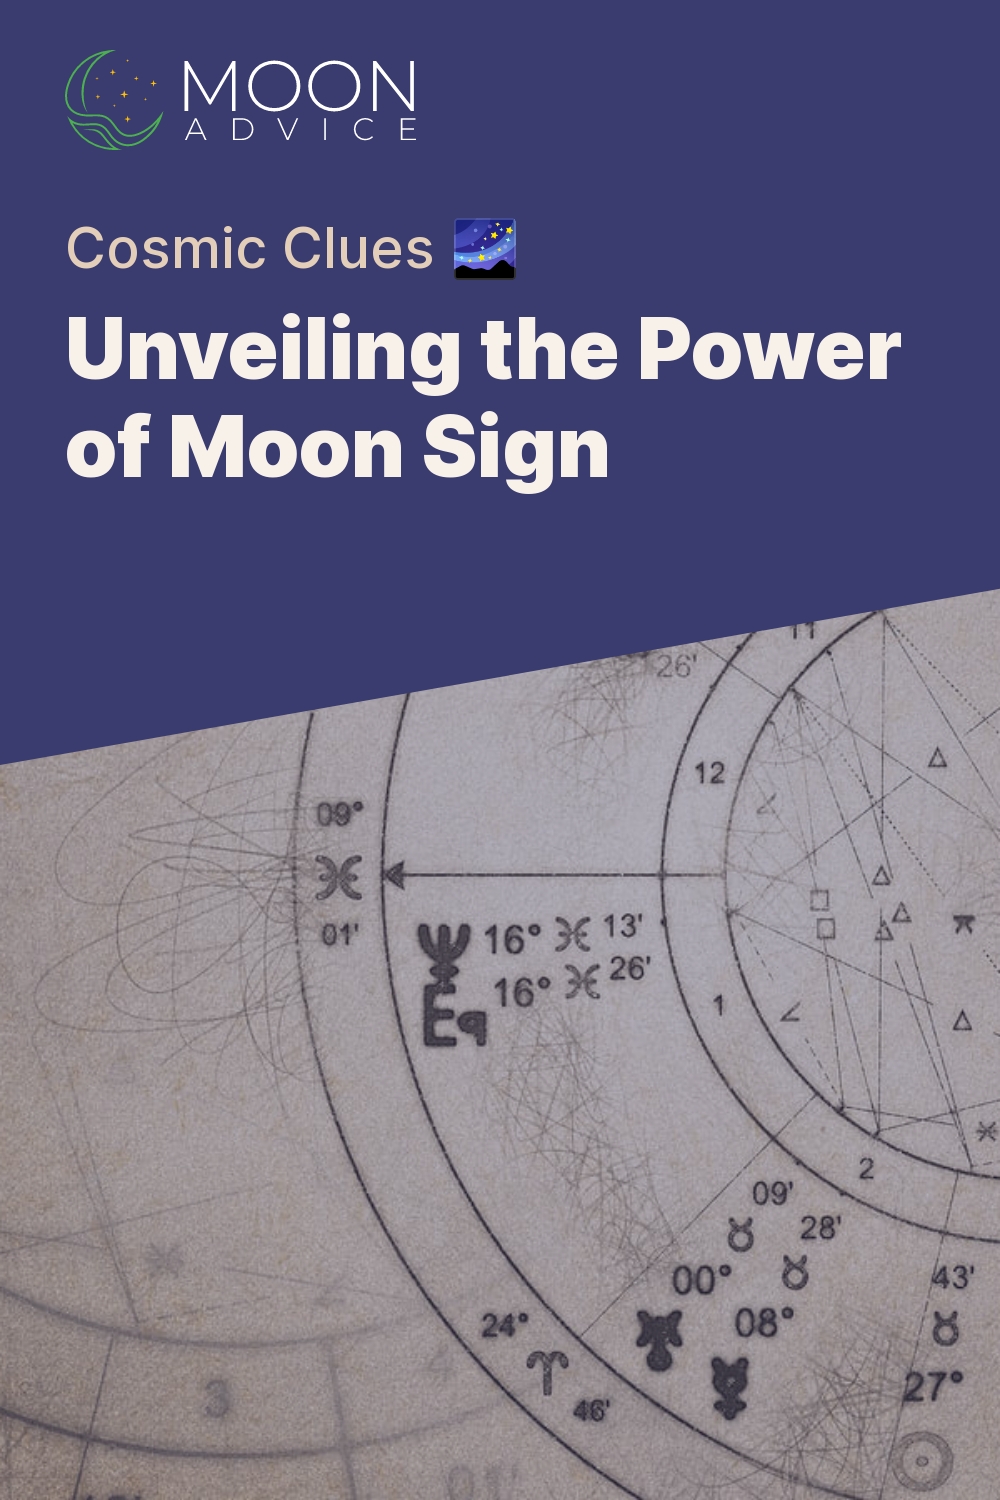 Unveiling the Power of Moon Sign - Cosmic Clues 🌌